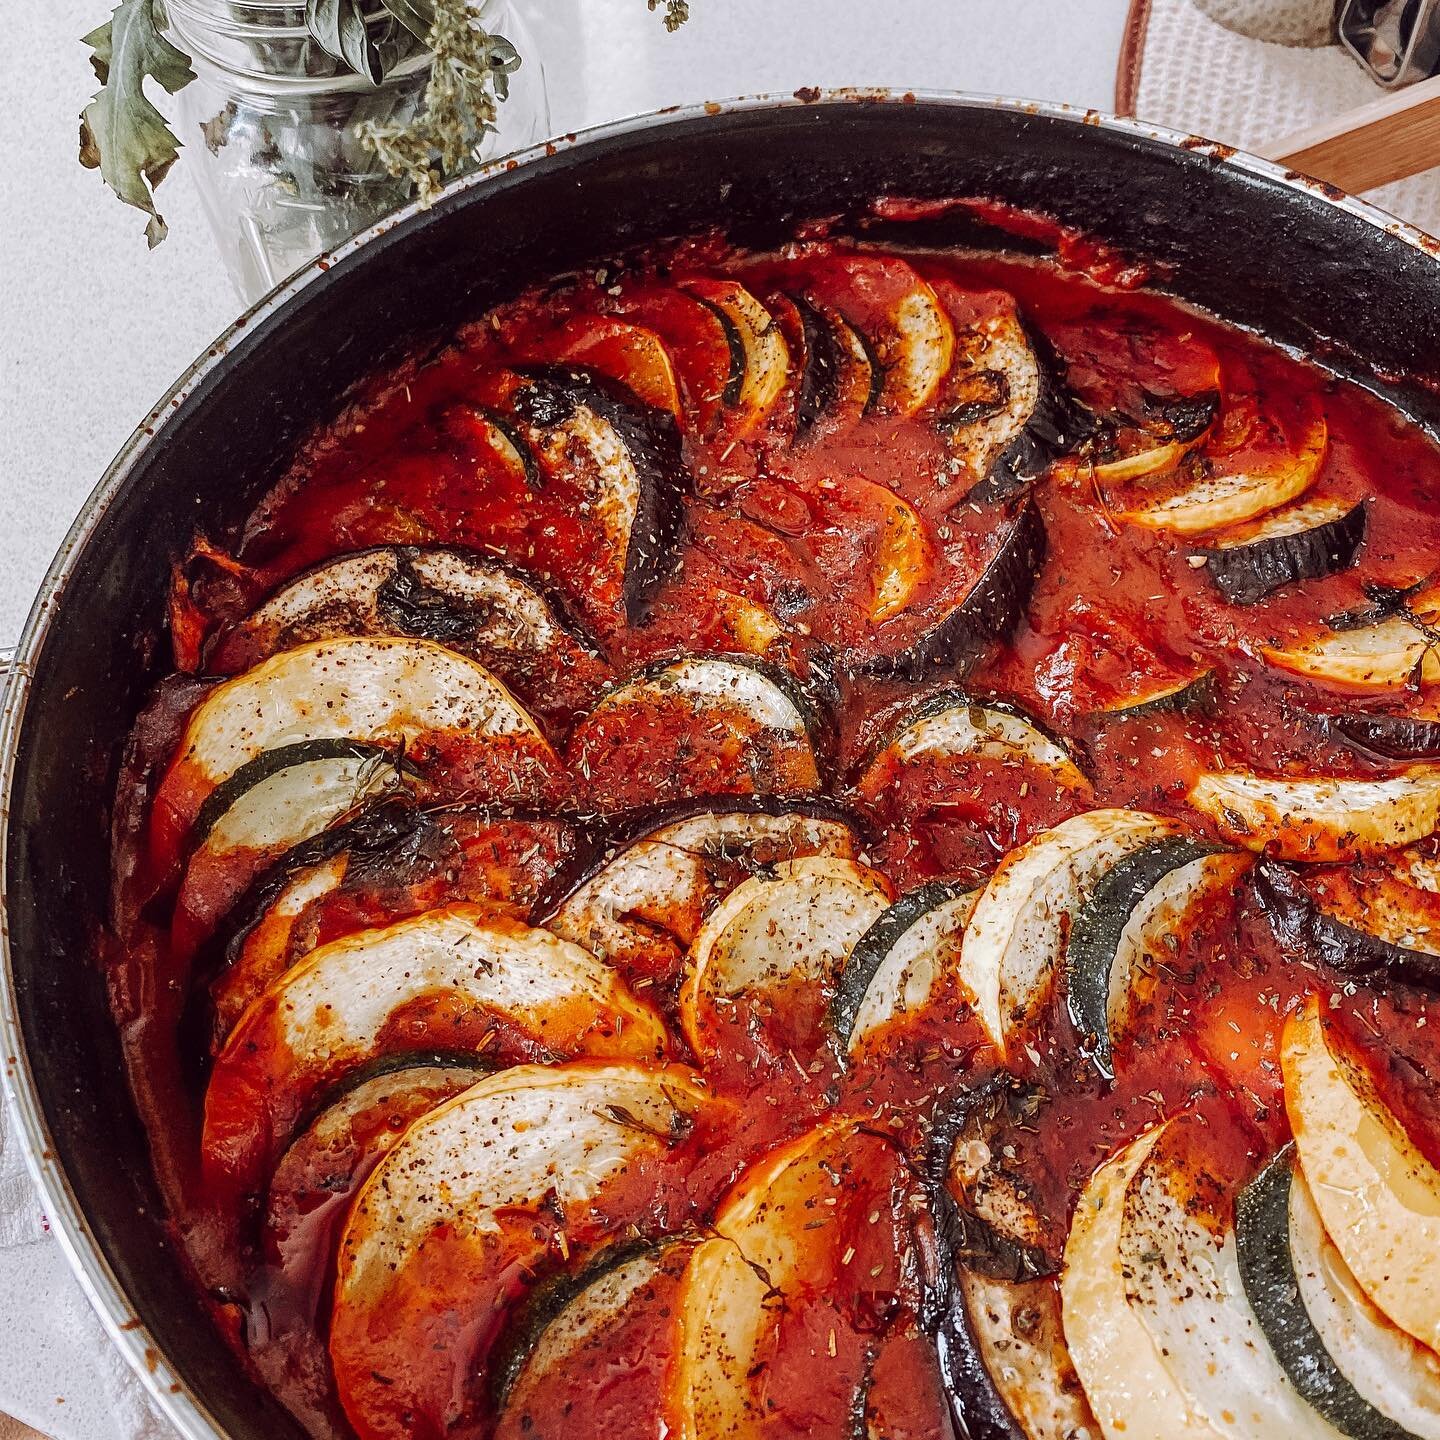 Ratatouille, recipe up tomorrow 🙌🐀

#food #foodporn #foodie #instafood #foodphotography #foodstagram #yummy #instagood #love #recipe #foodblogger #recipe #like #delicious #homemade #healthyfood #photooftheday #picoftheday #dinner #foodgasm #foodies